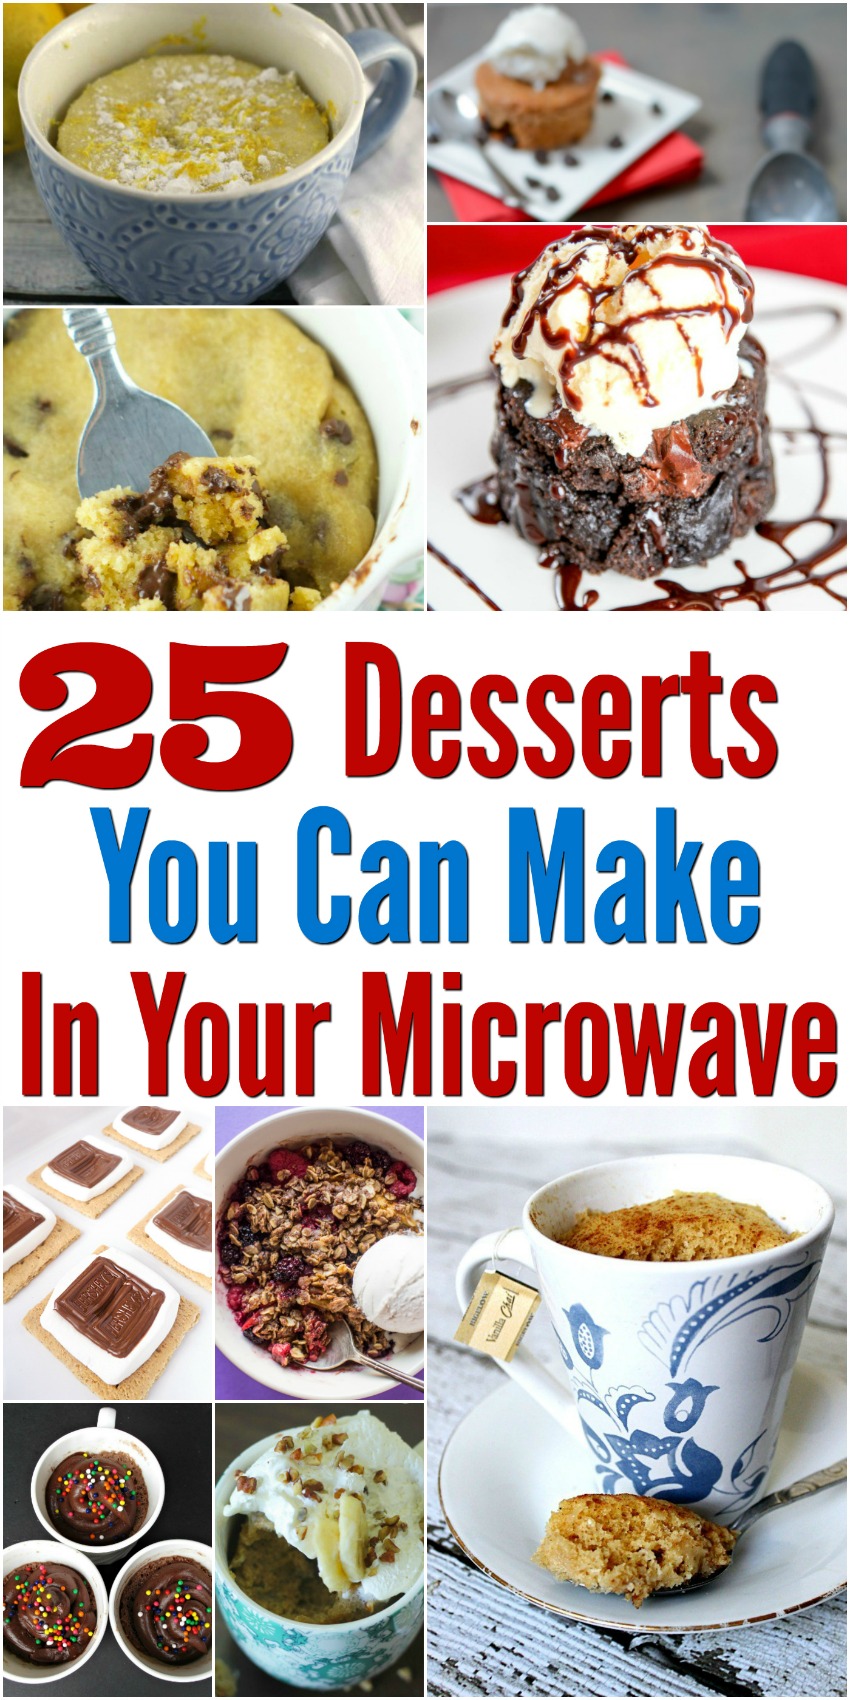 Looking for some delicious desserts you can make in under 10 minutes Check out our list of 25 Desserts You Can Make In Your Microwave here!